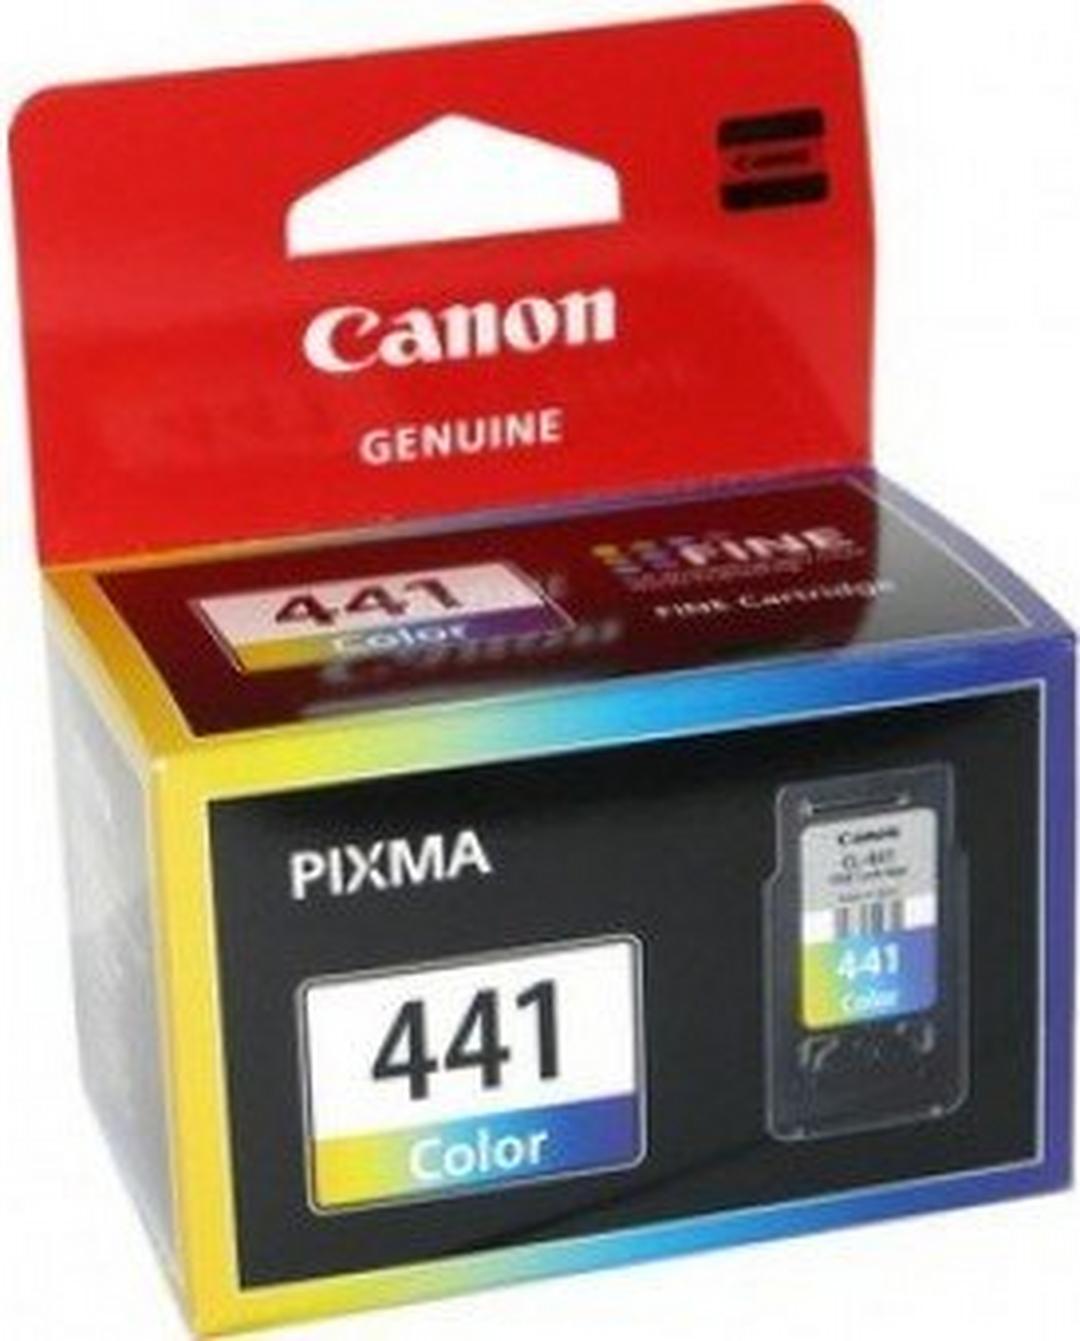 CANON Ink CL-441 for Inkjet Printing  - CMY (Tri Colour Pack)